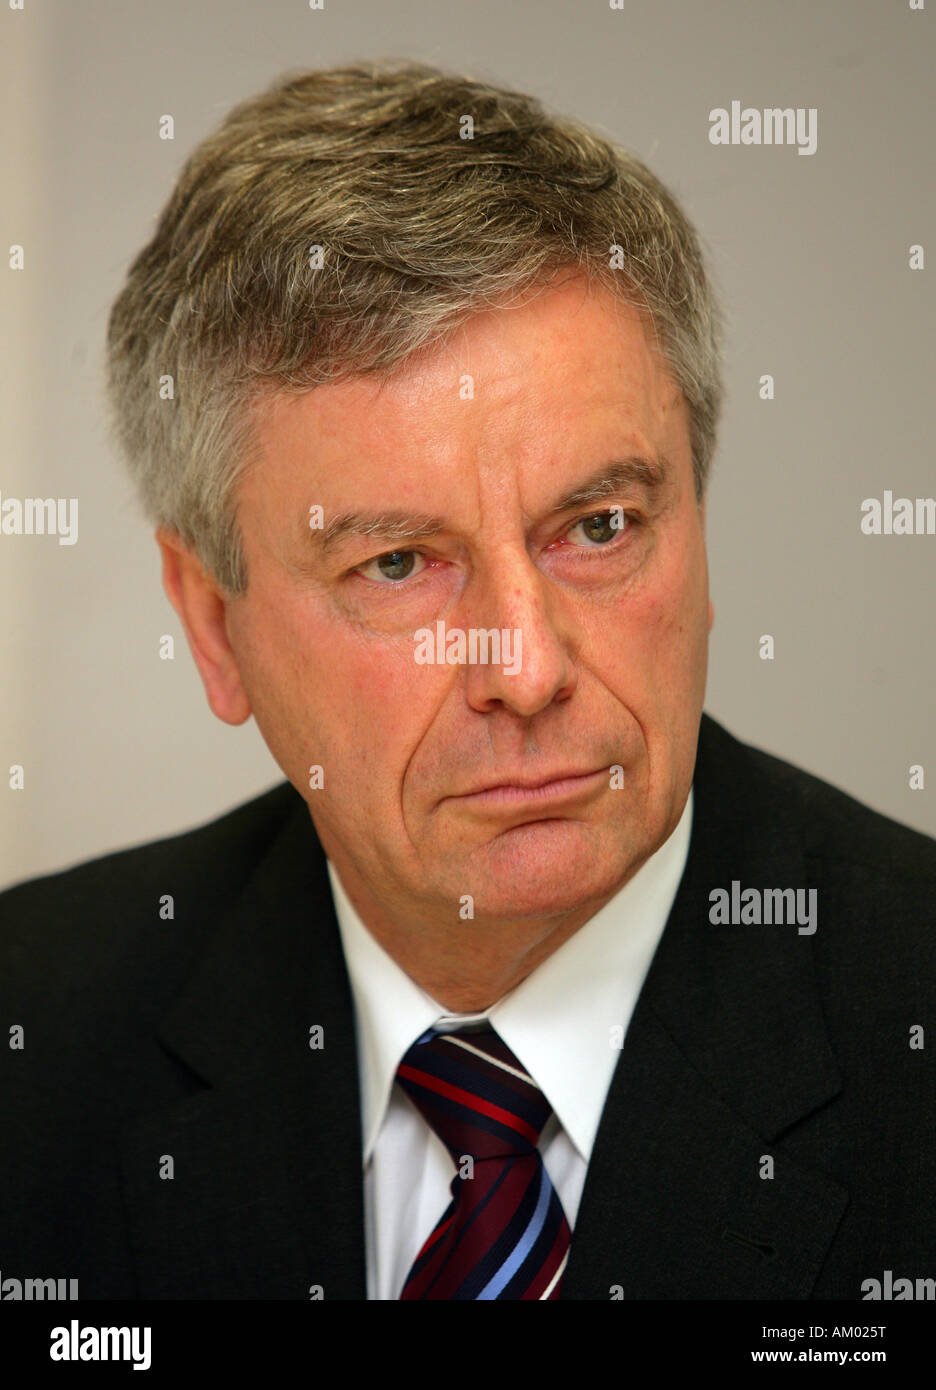 Heinz Georg Bamberger, minister of justice of rhineland-palatinate, germany Stock Photo